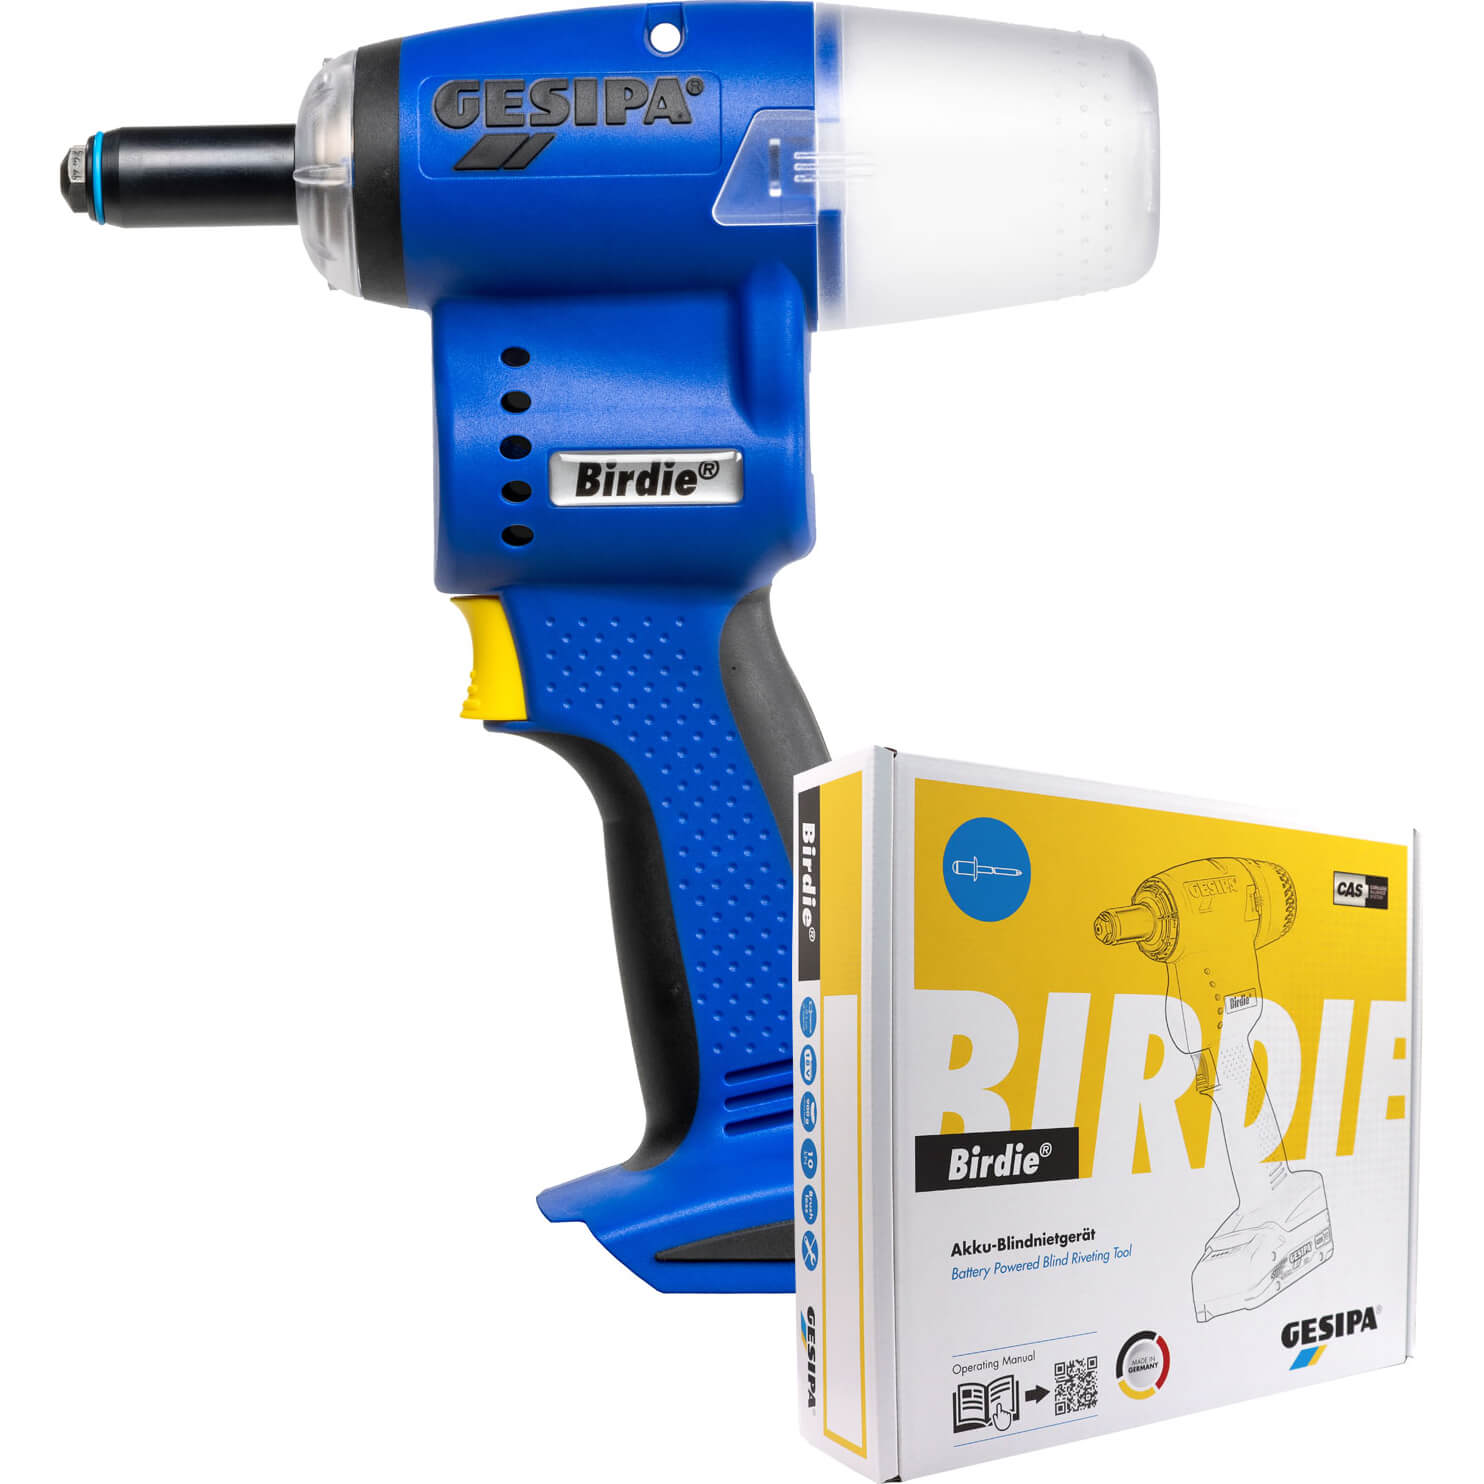 Image of Gesipa Birdie 18v Cordless Brushless Riveter Tool No Batteries No Charger No Case